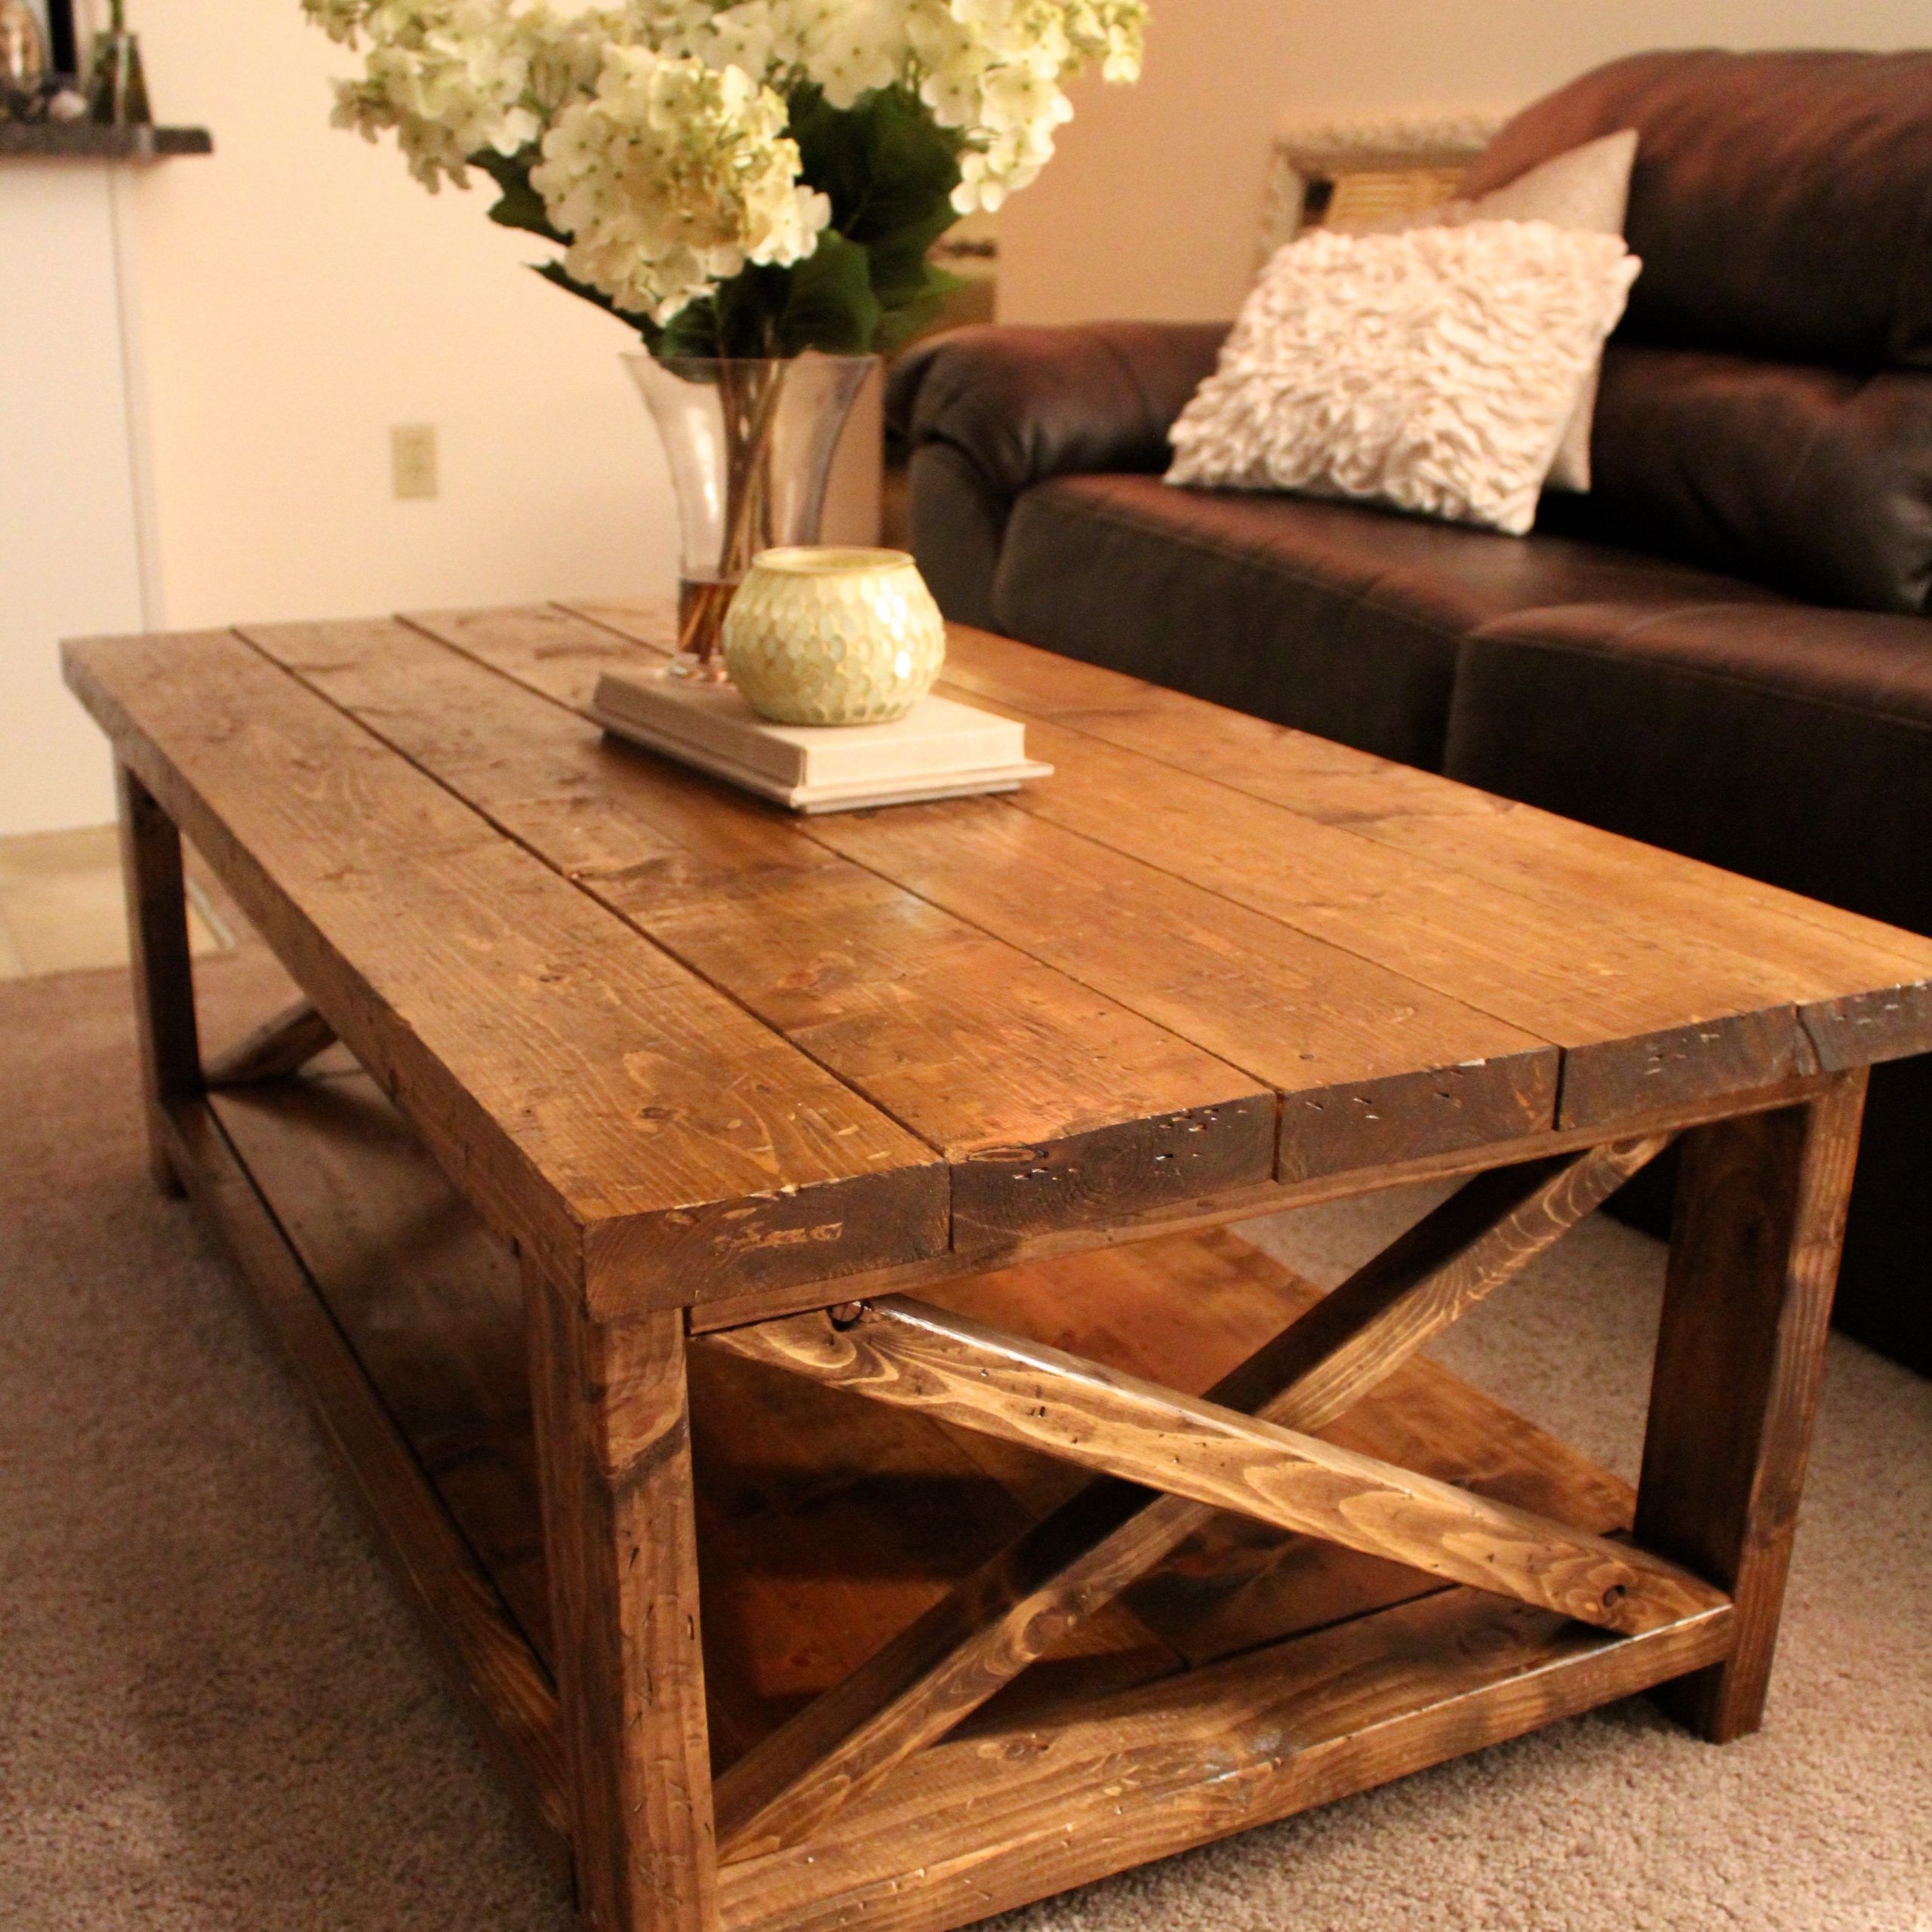 Rustic Espresso Wood Coffee Tables Intended For Famous Diy Rustic Coffee Table Designs: Http://www (View 6 of 20)